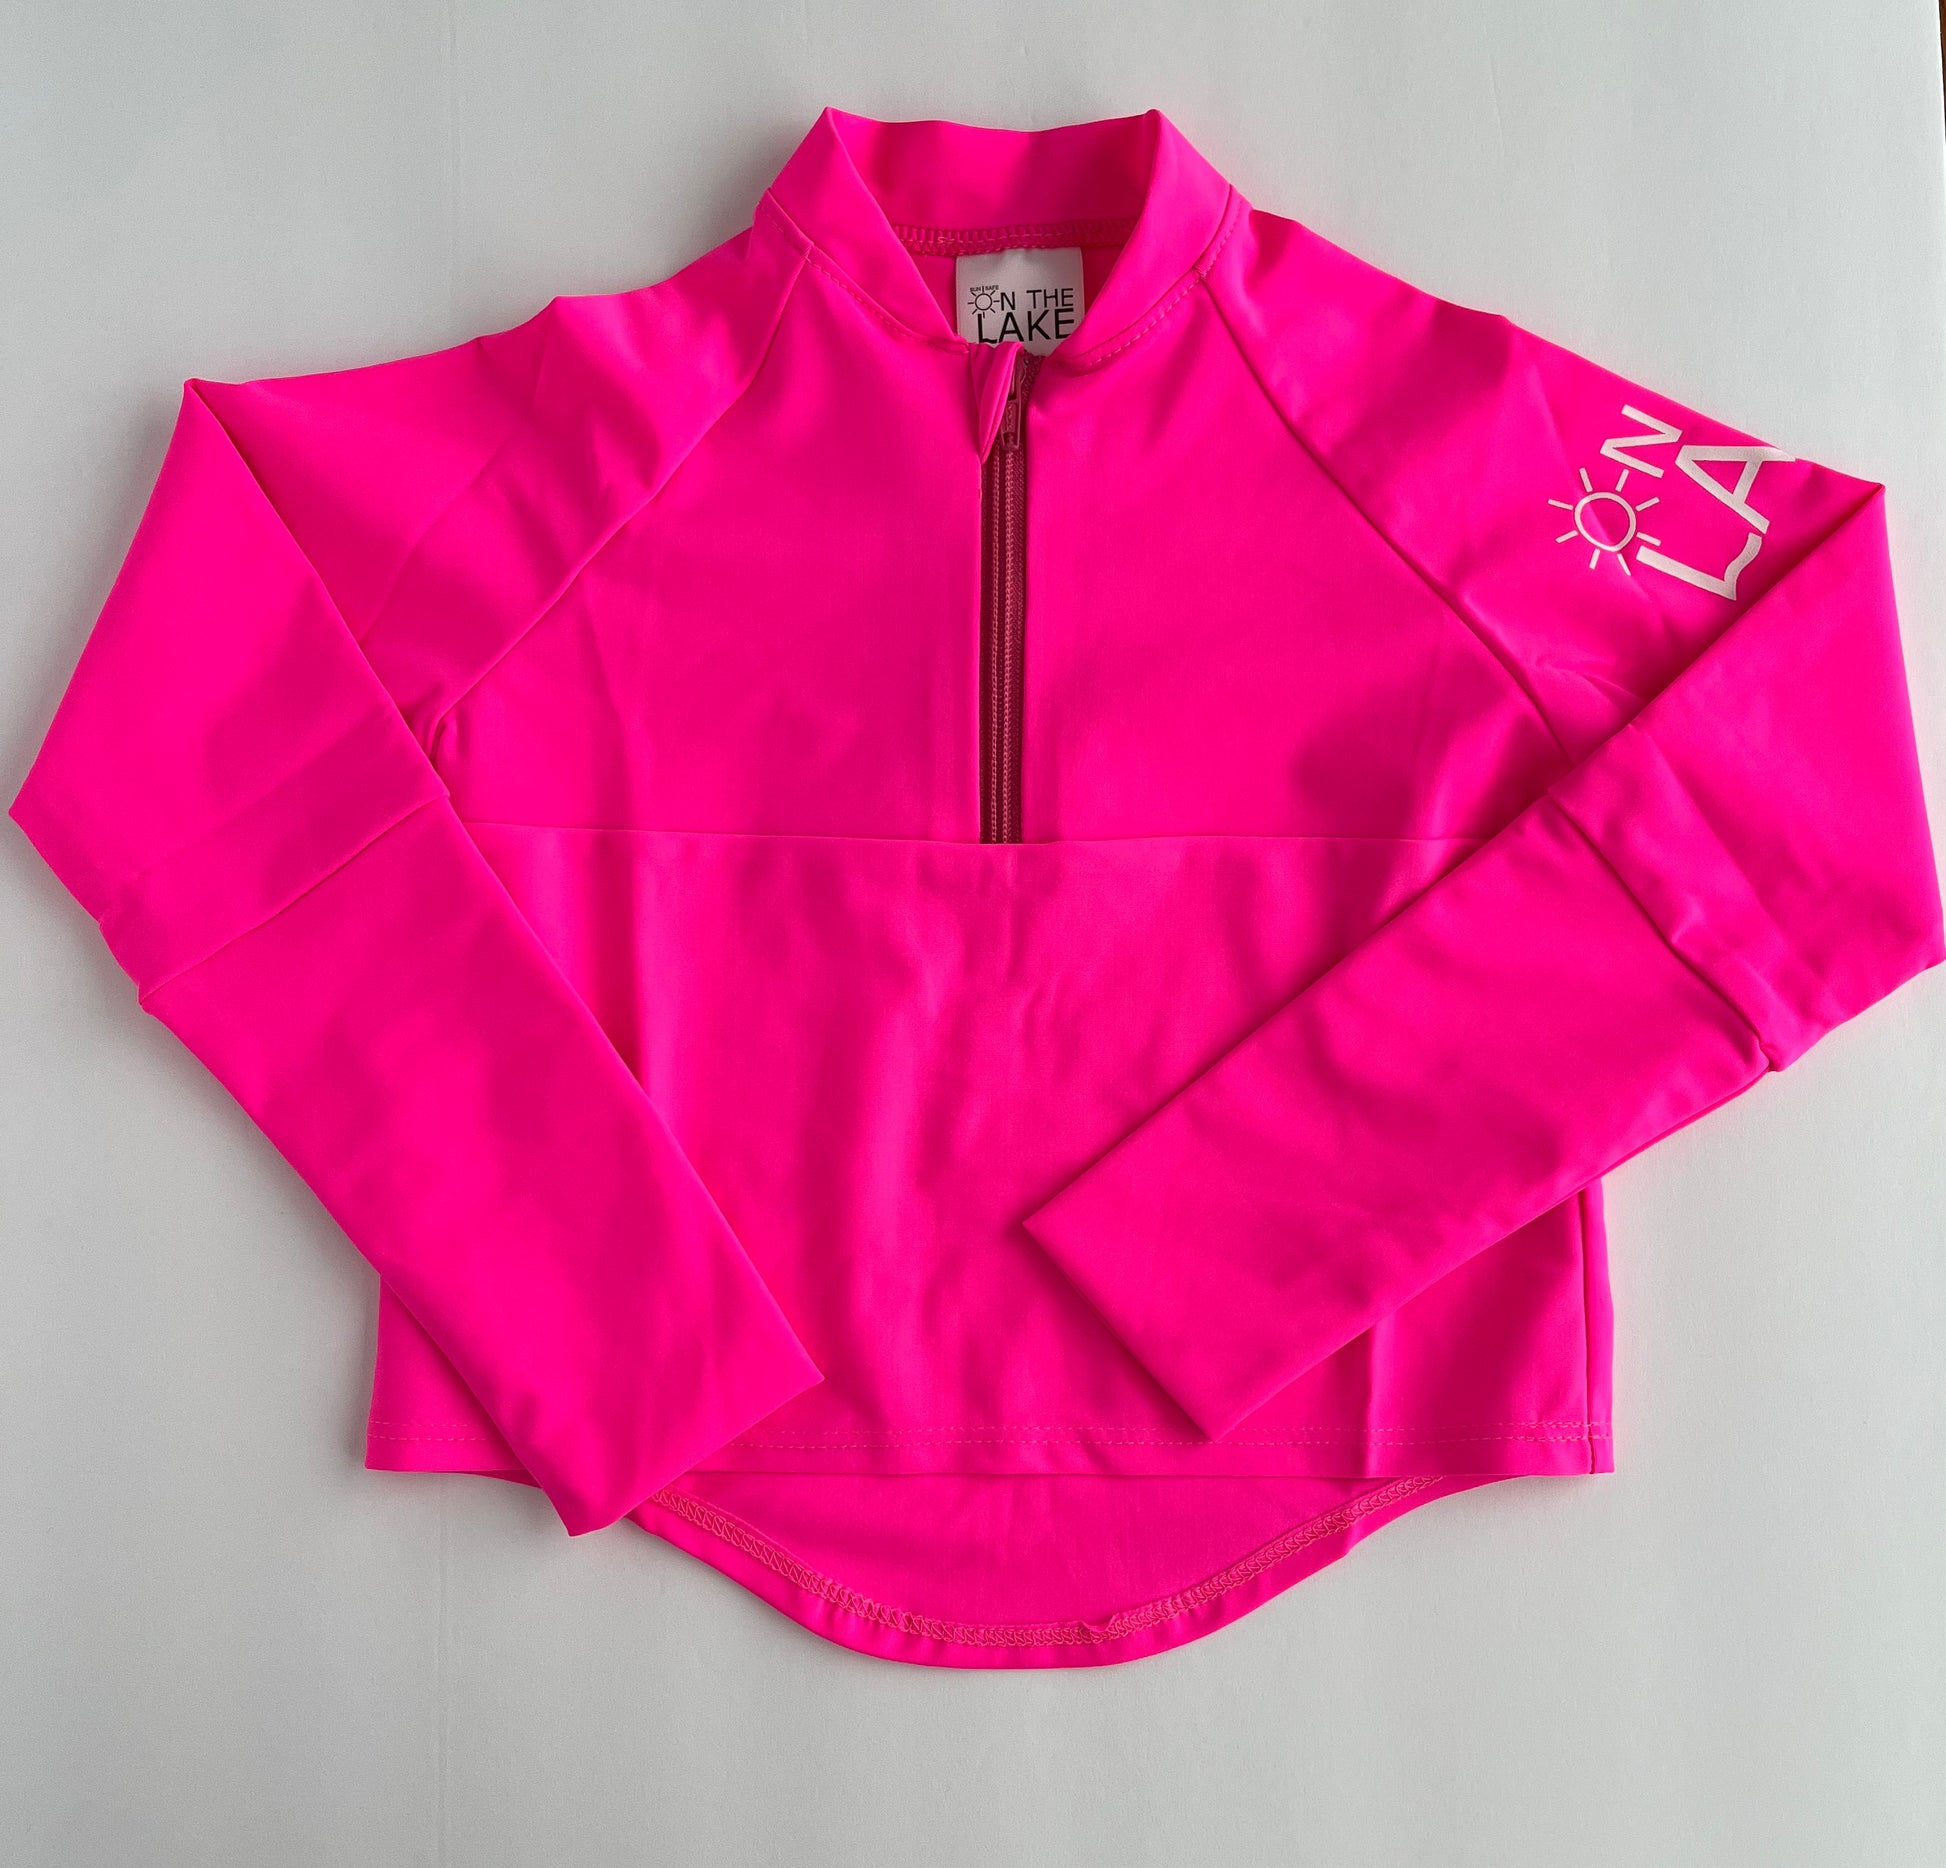 UPF 50+ kids long sleeve shirt swimwear and sun protection quality children's clothing Canada hot pink colour